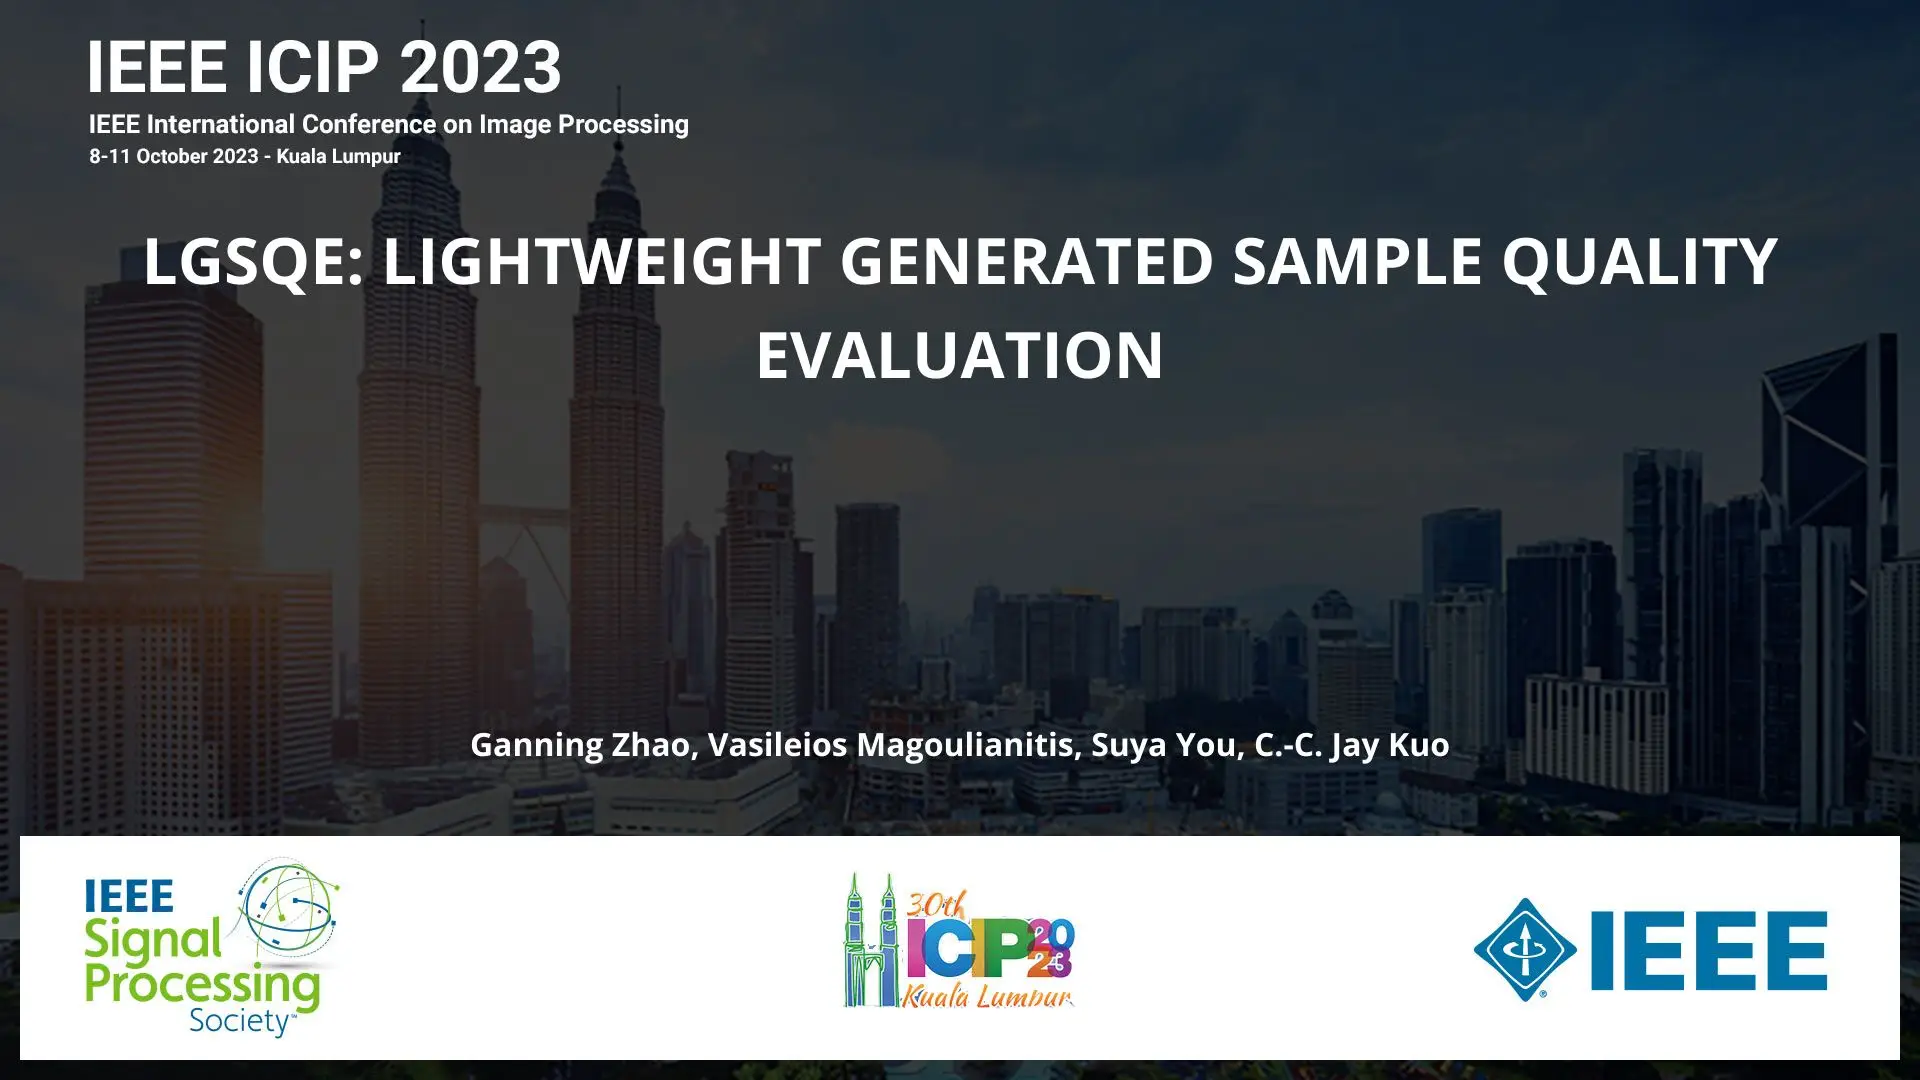 LGSQE: LIGHTWEIGHT GENERATED SAMPLE QUALITY EVALUATION